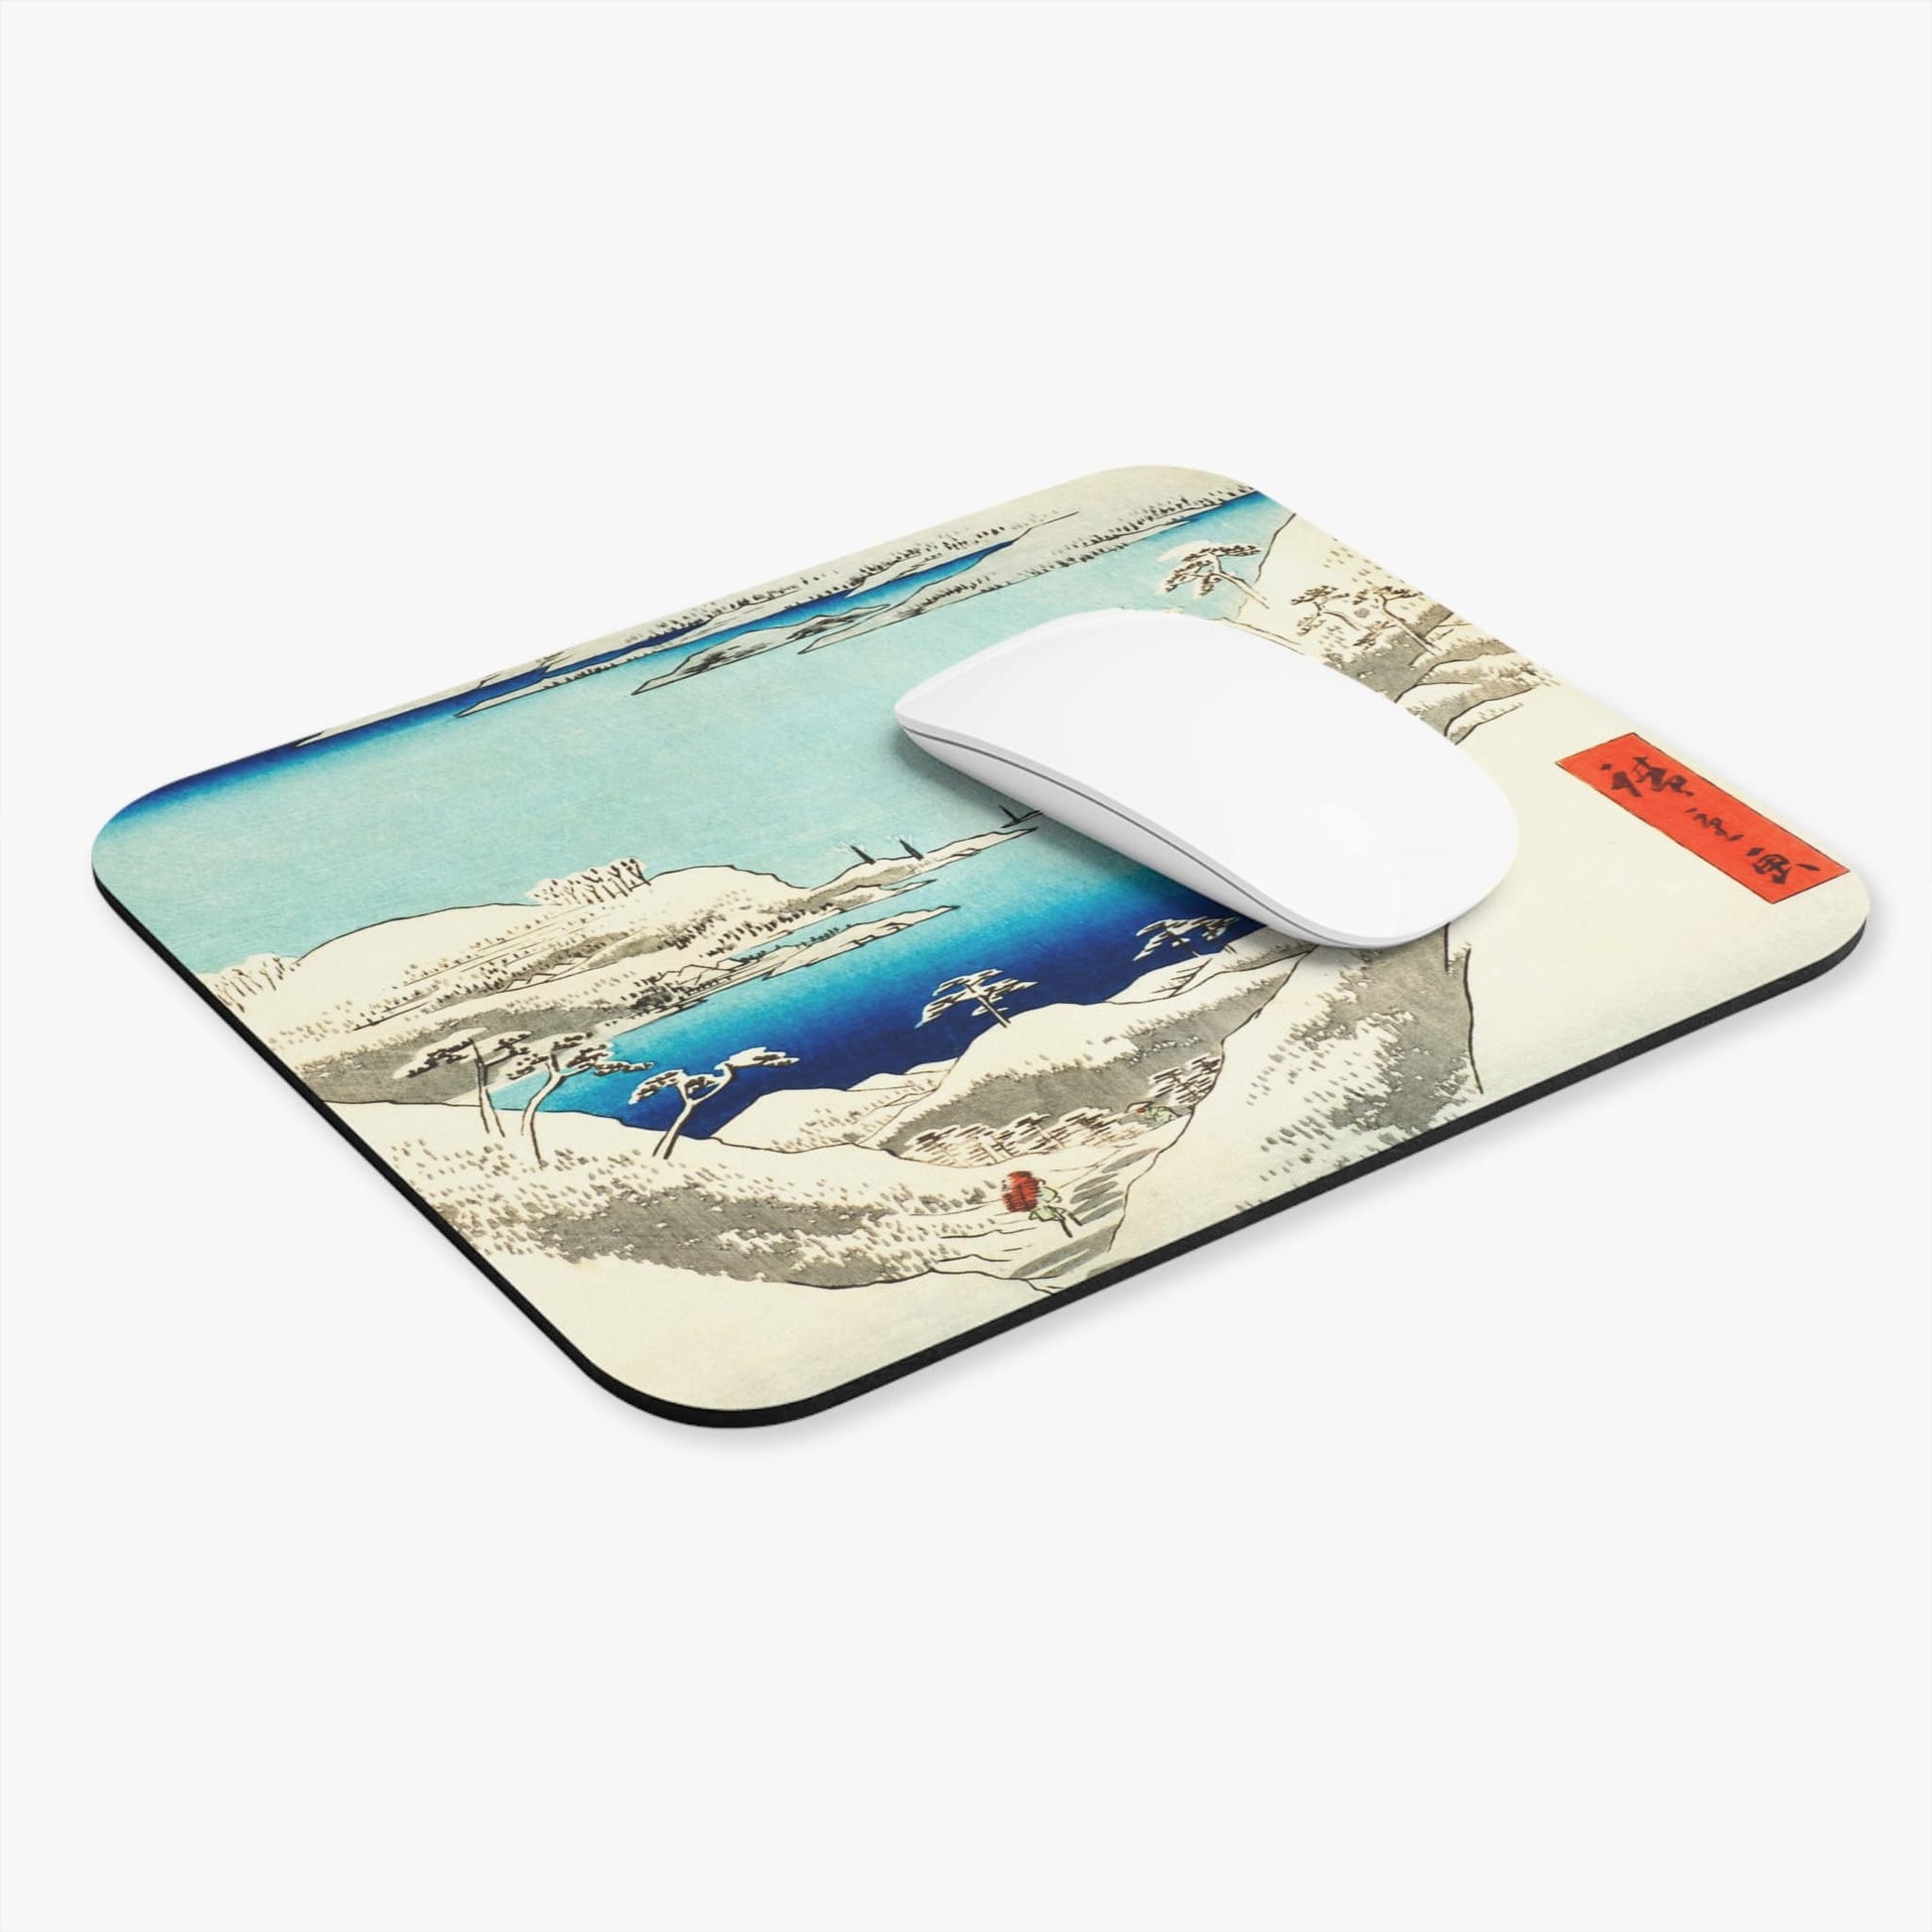 Japanese Winter Computer Desk Mouse Pad With White Mouse